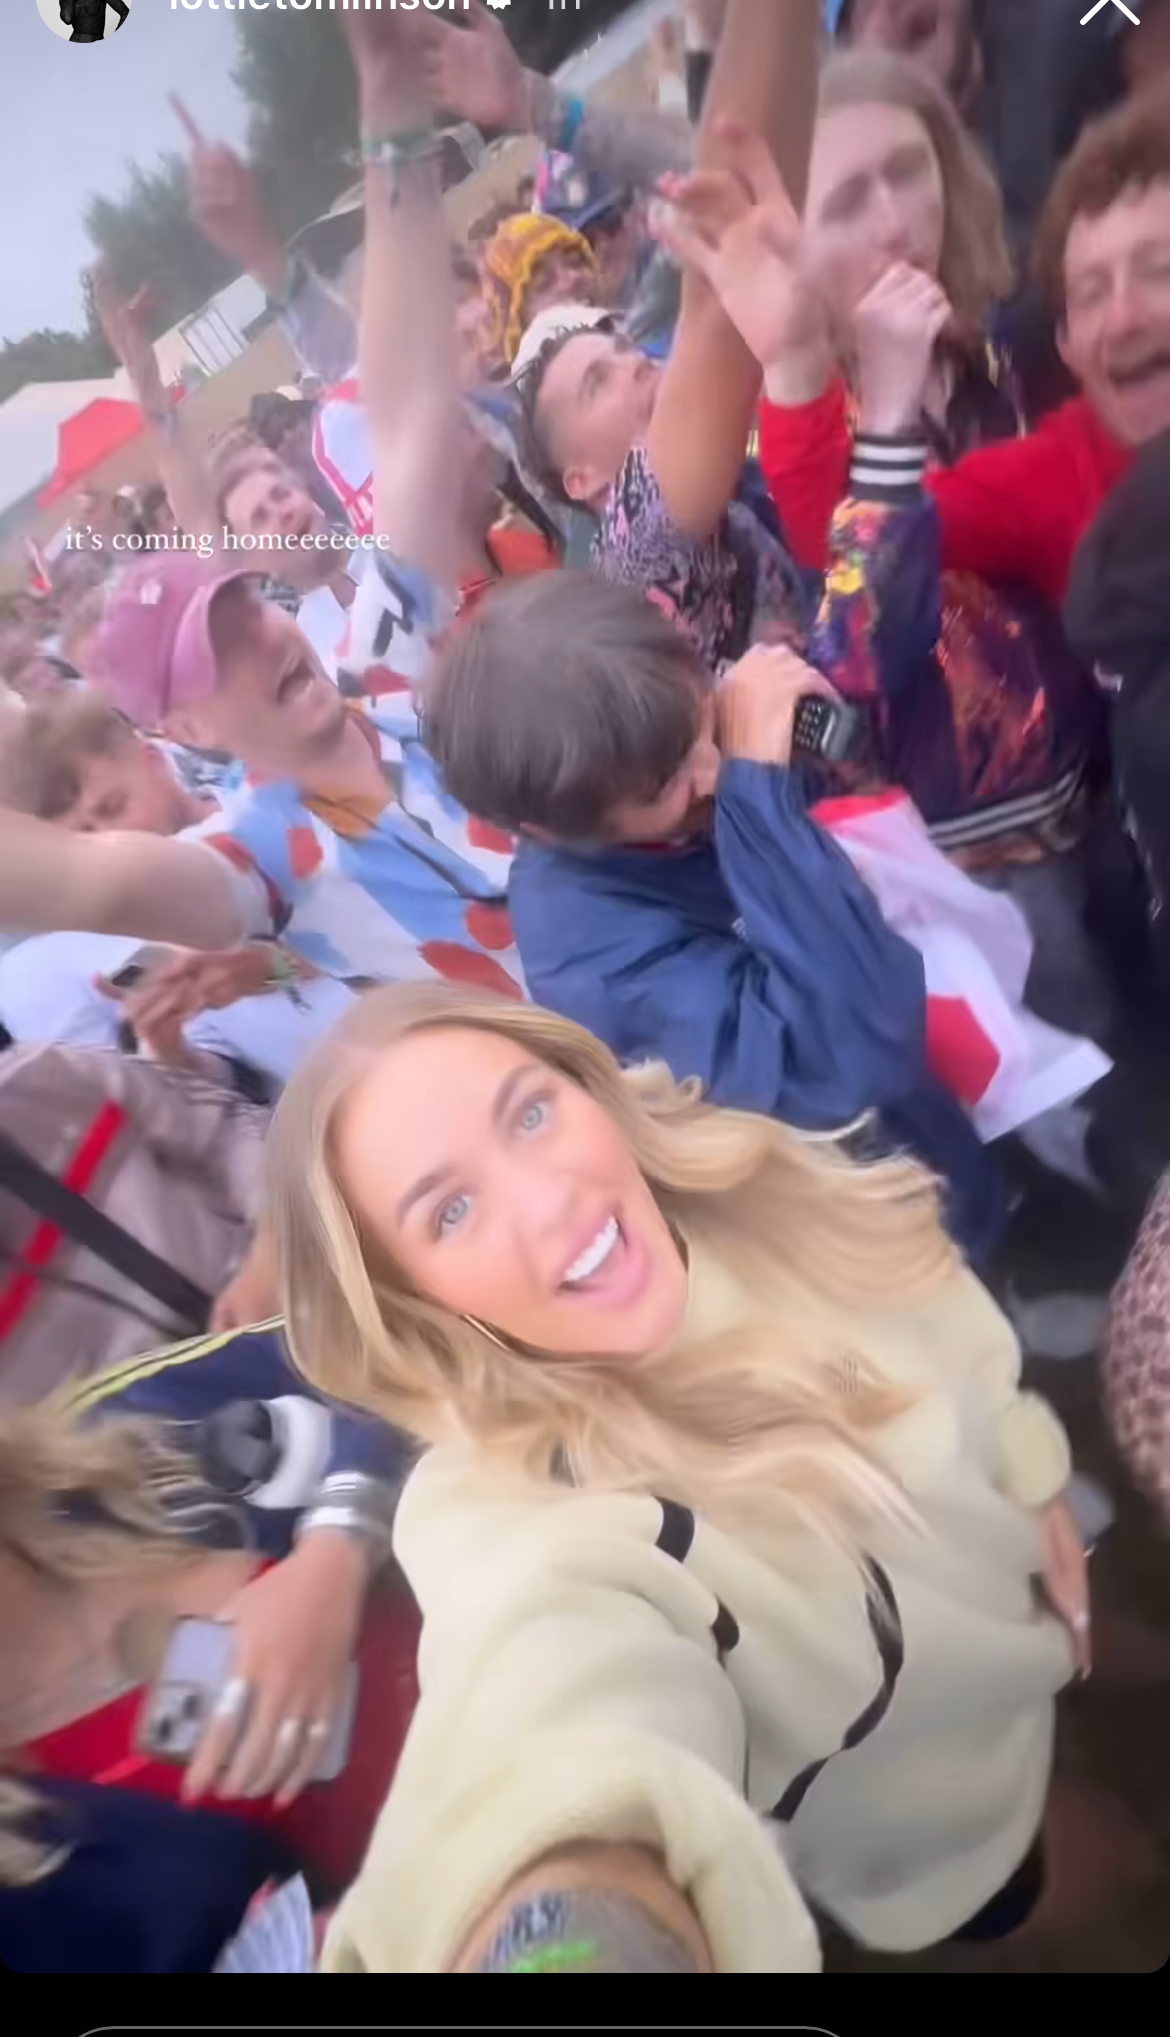 Lottie Tomlinson takes a selfie amidst a cheering crowd of England fans celebrating. She is dressed casually in a light-colored top